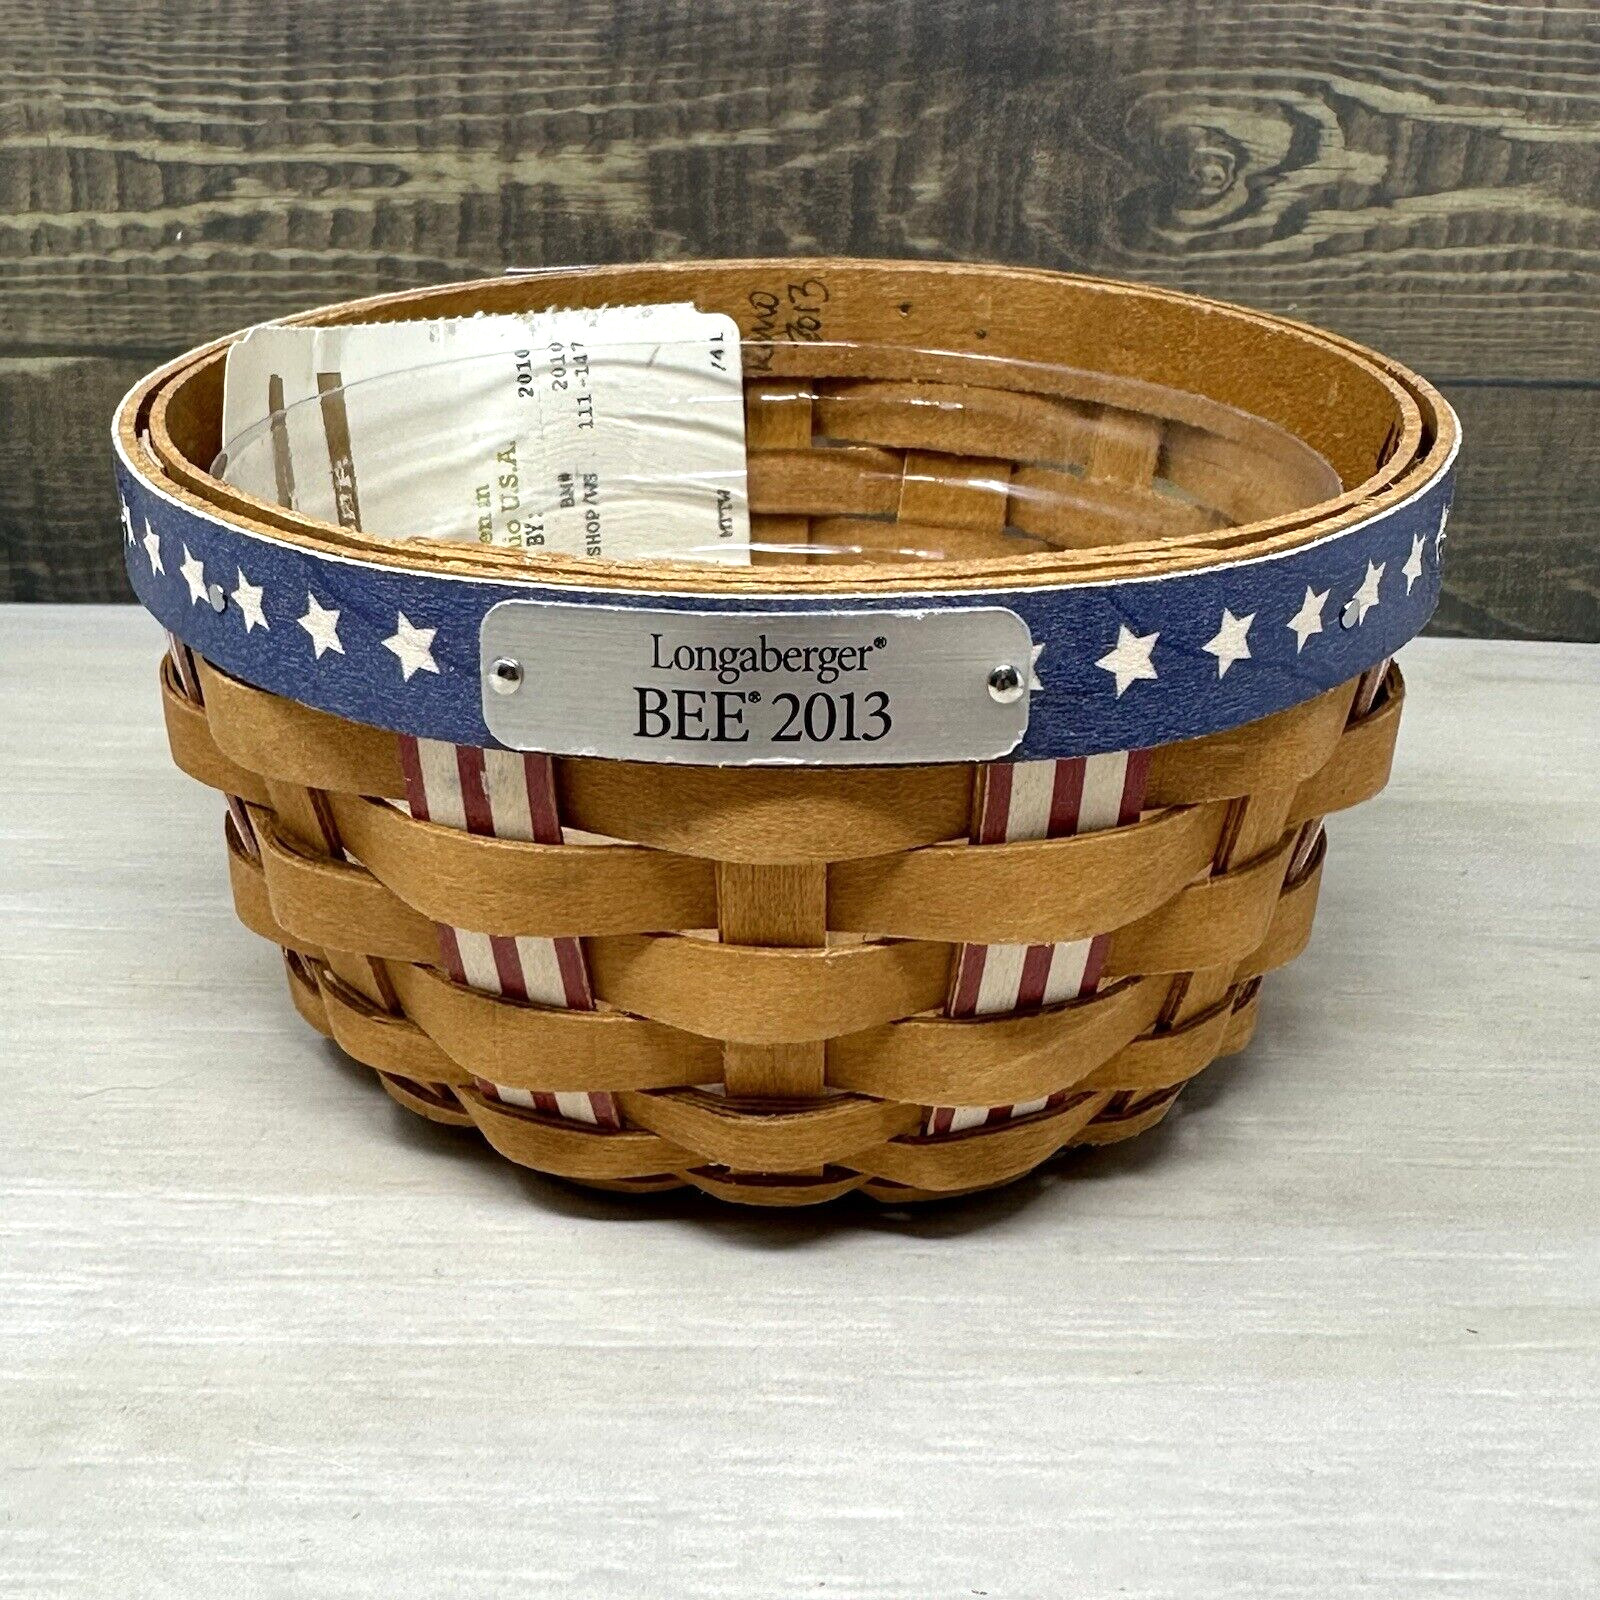 Longaberger 2013 Bee Basket and Protector Stars and Stripes